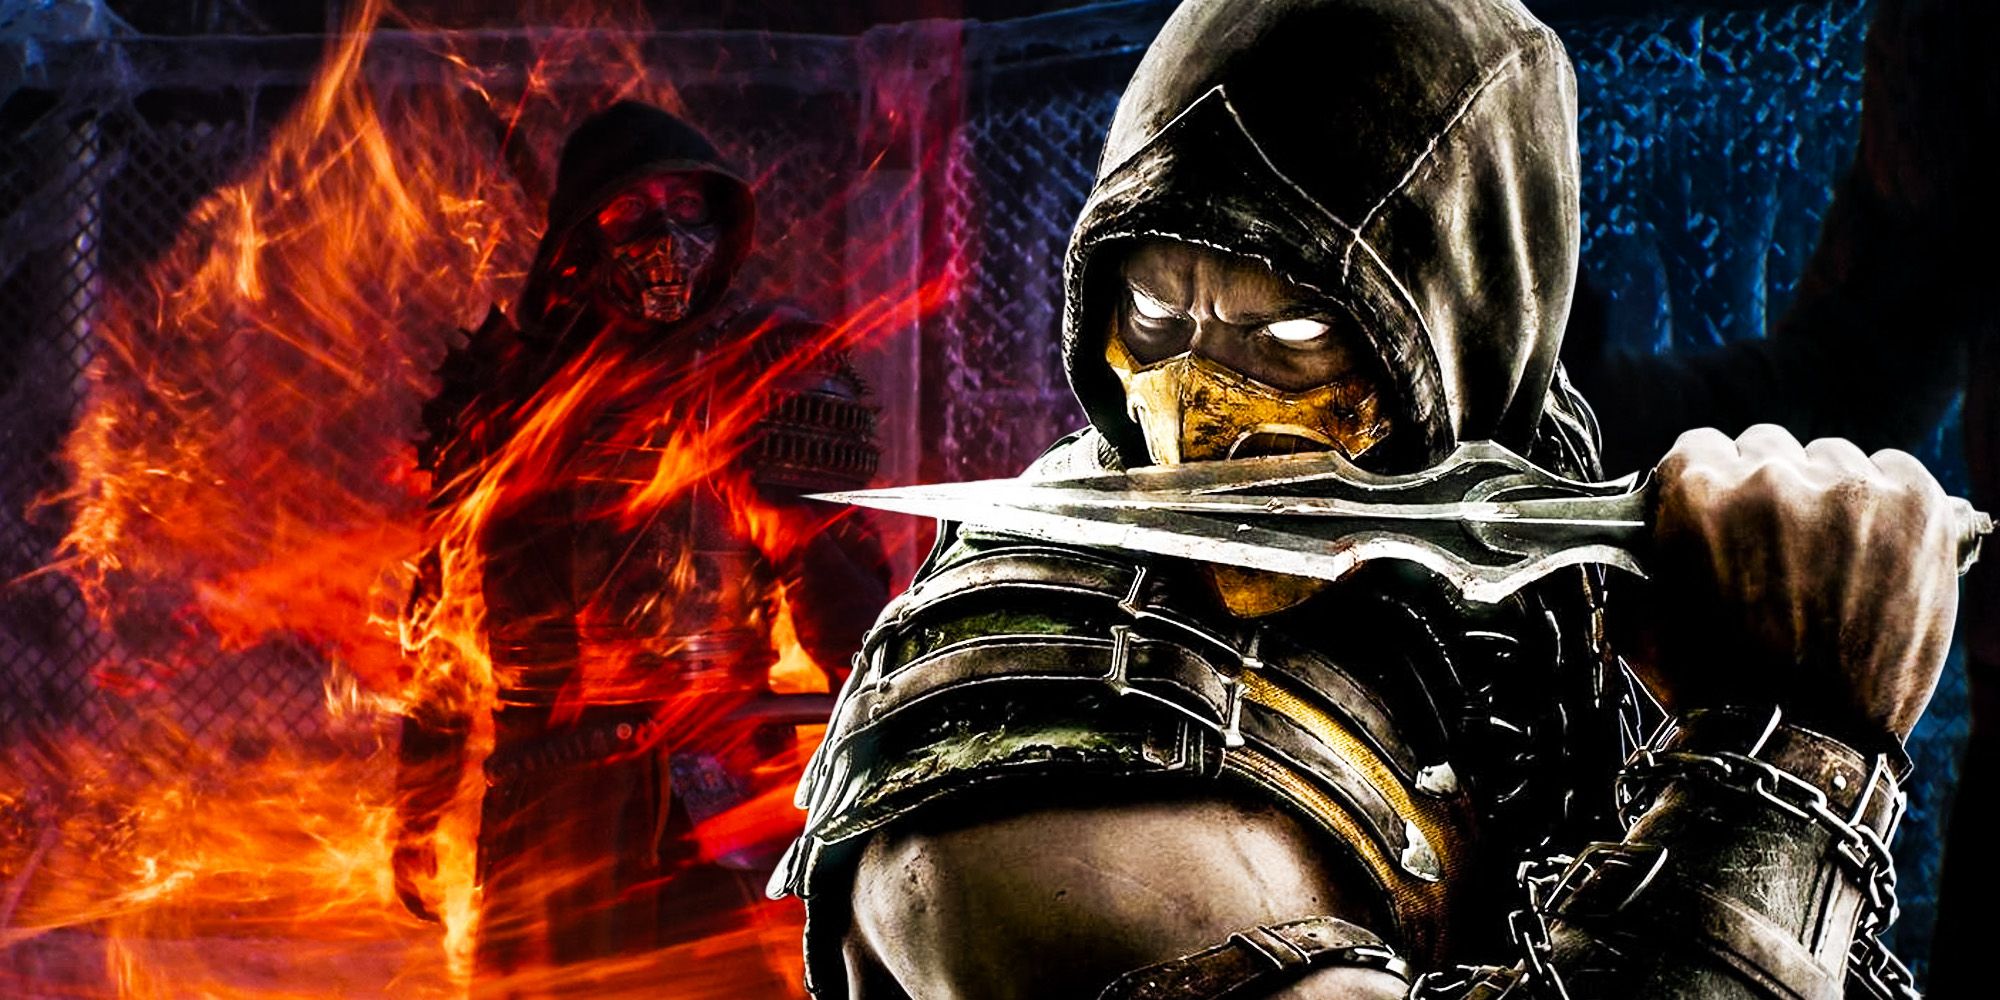 Mortal kombat 2 Tease Sets Up More Of The Scorpion You Really Want